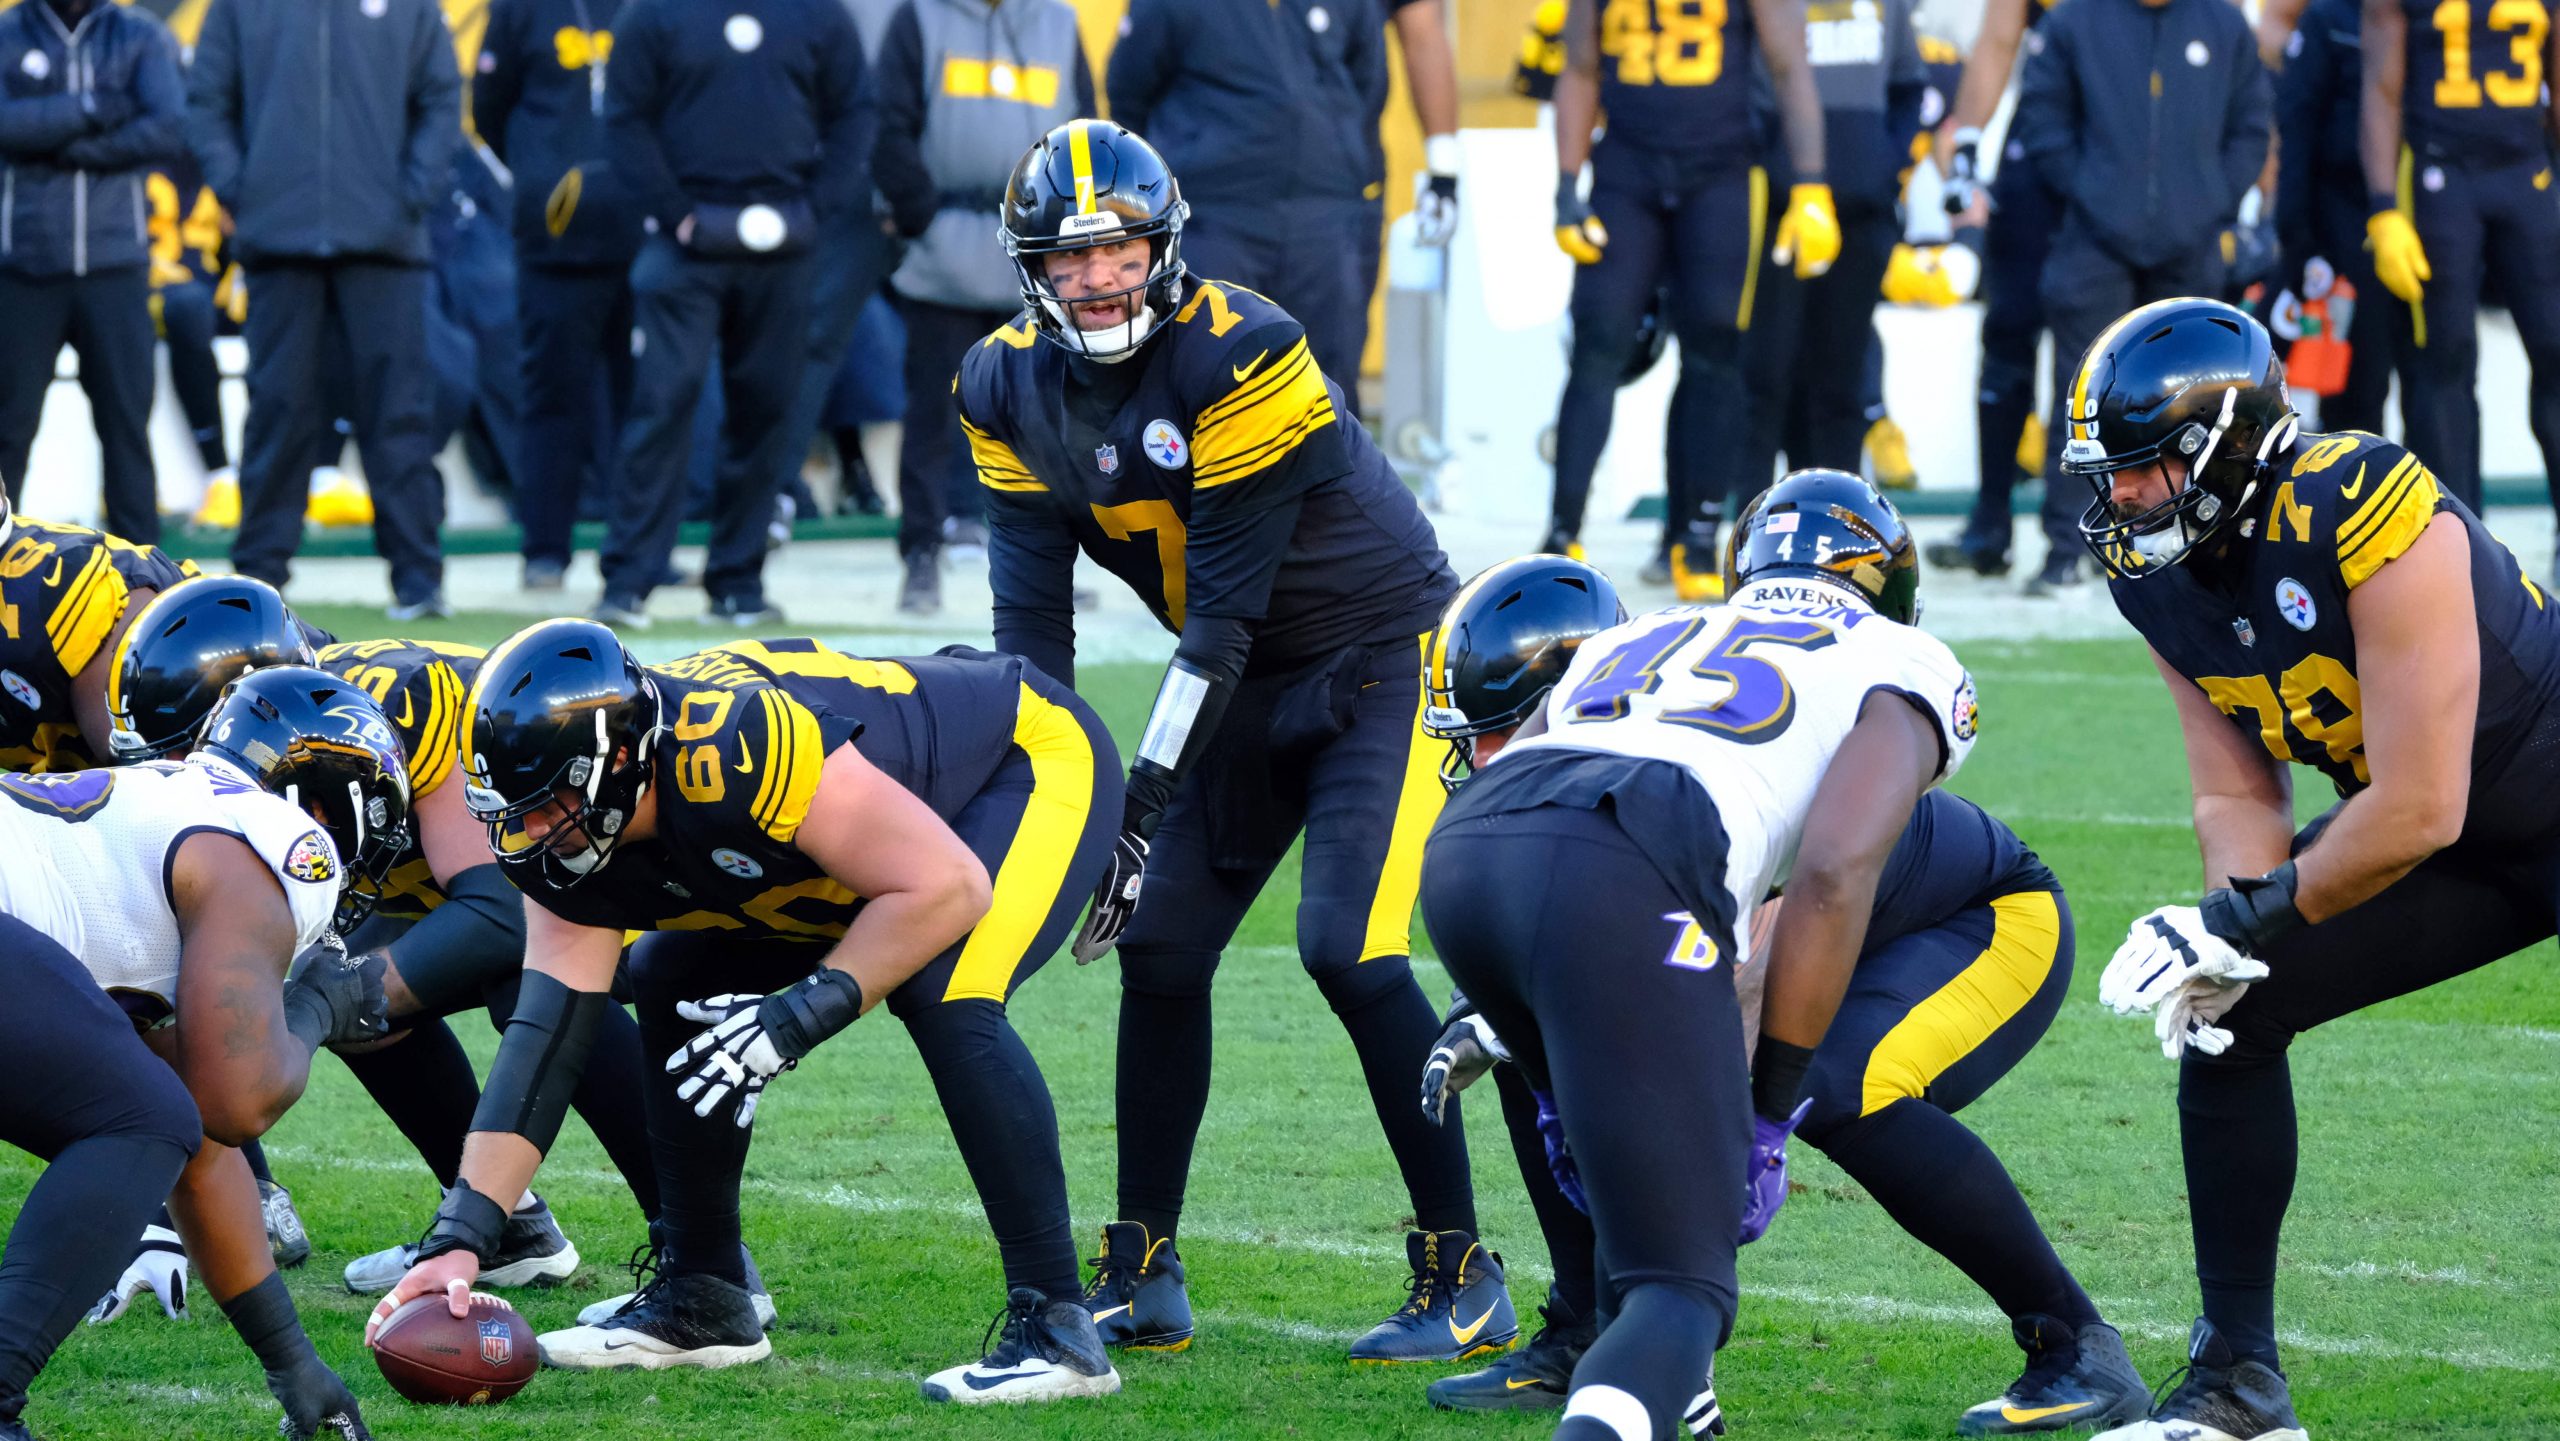 December 2nd, 2020: Ben Roethlisberger 7 during the Pittsburgh Steelers vs Baltimore Ravens game at Heinz Field in Pitt